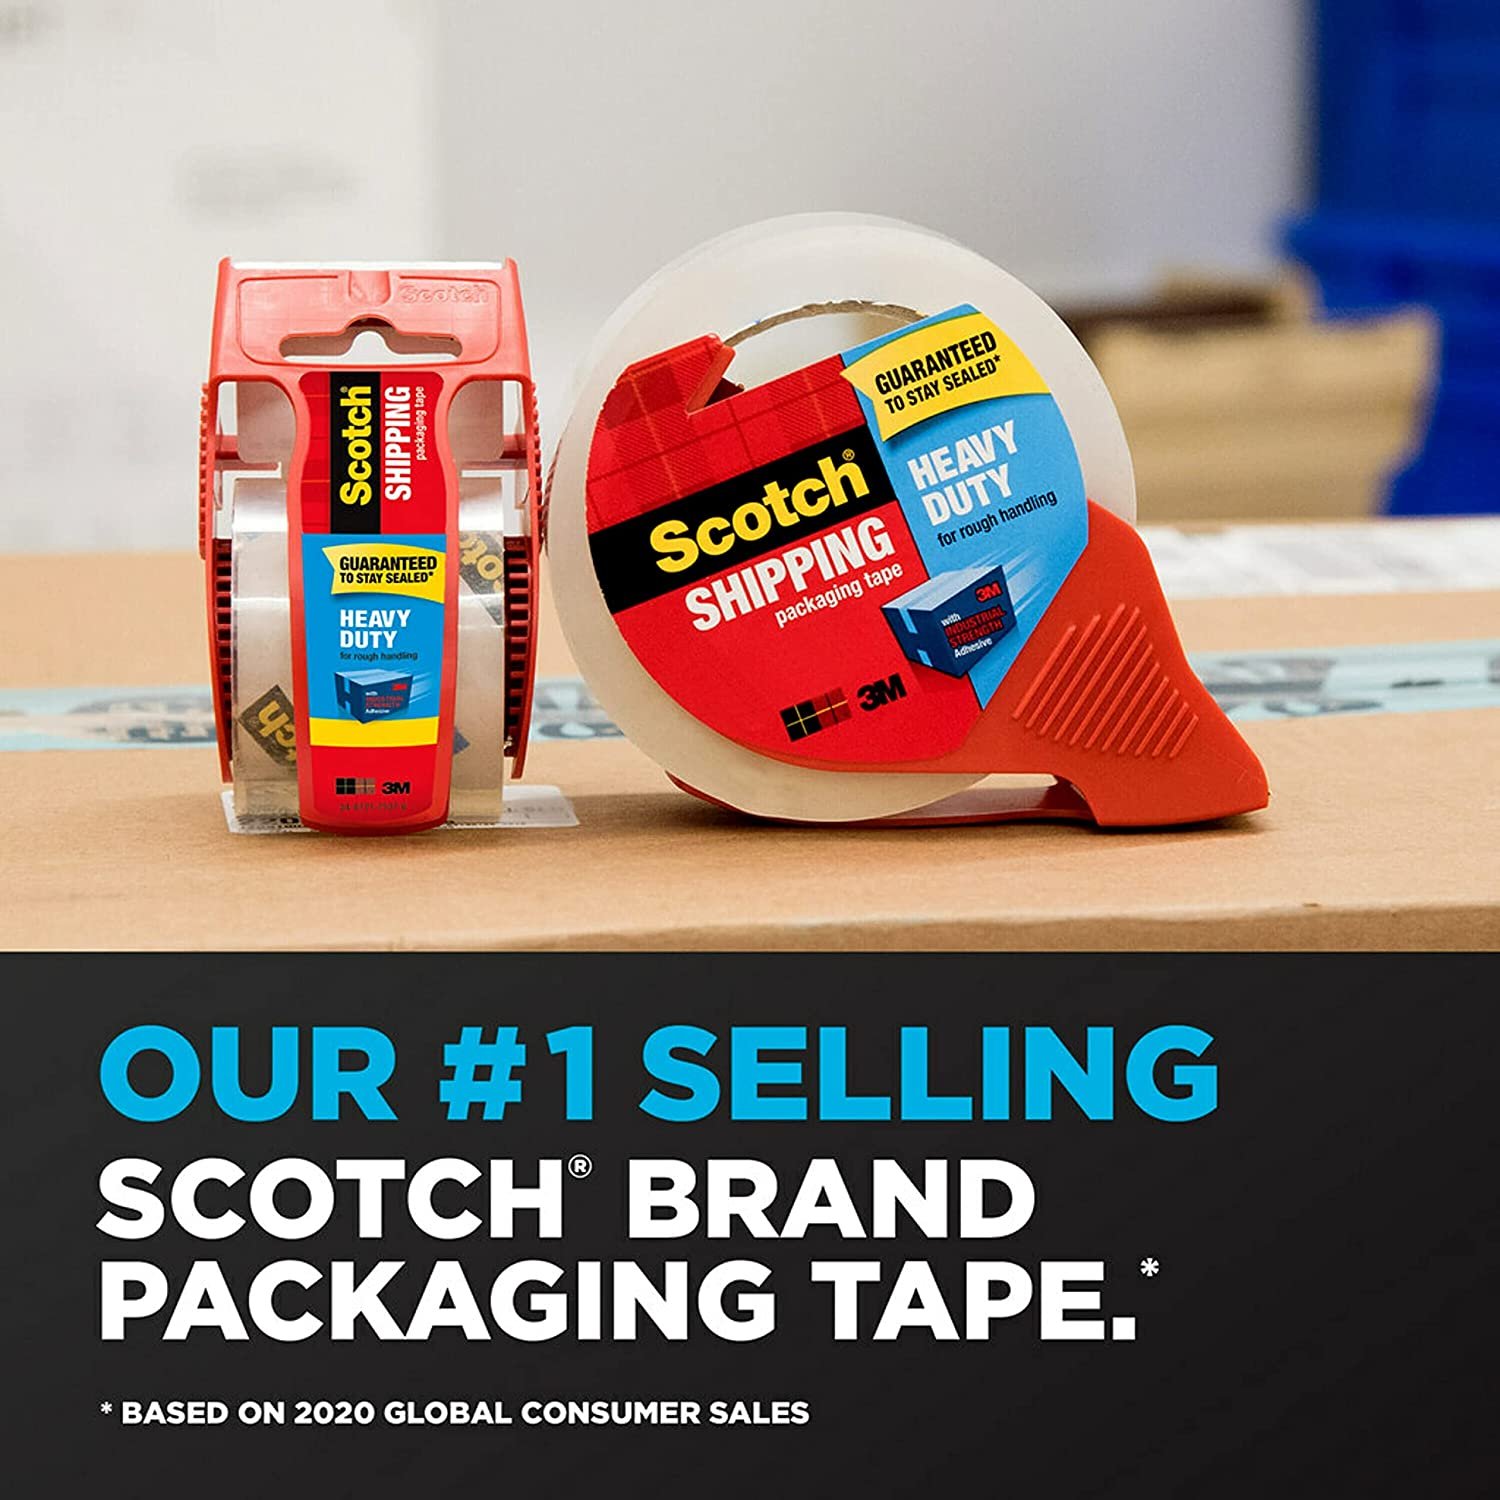 Scotch Heavy Duty Packaging Tape by the Scotch Store, 2 Pack (Copy)